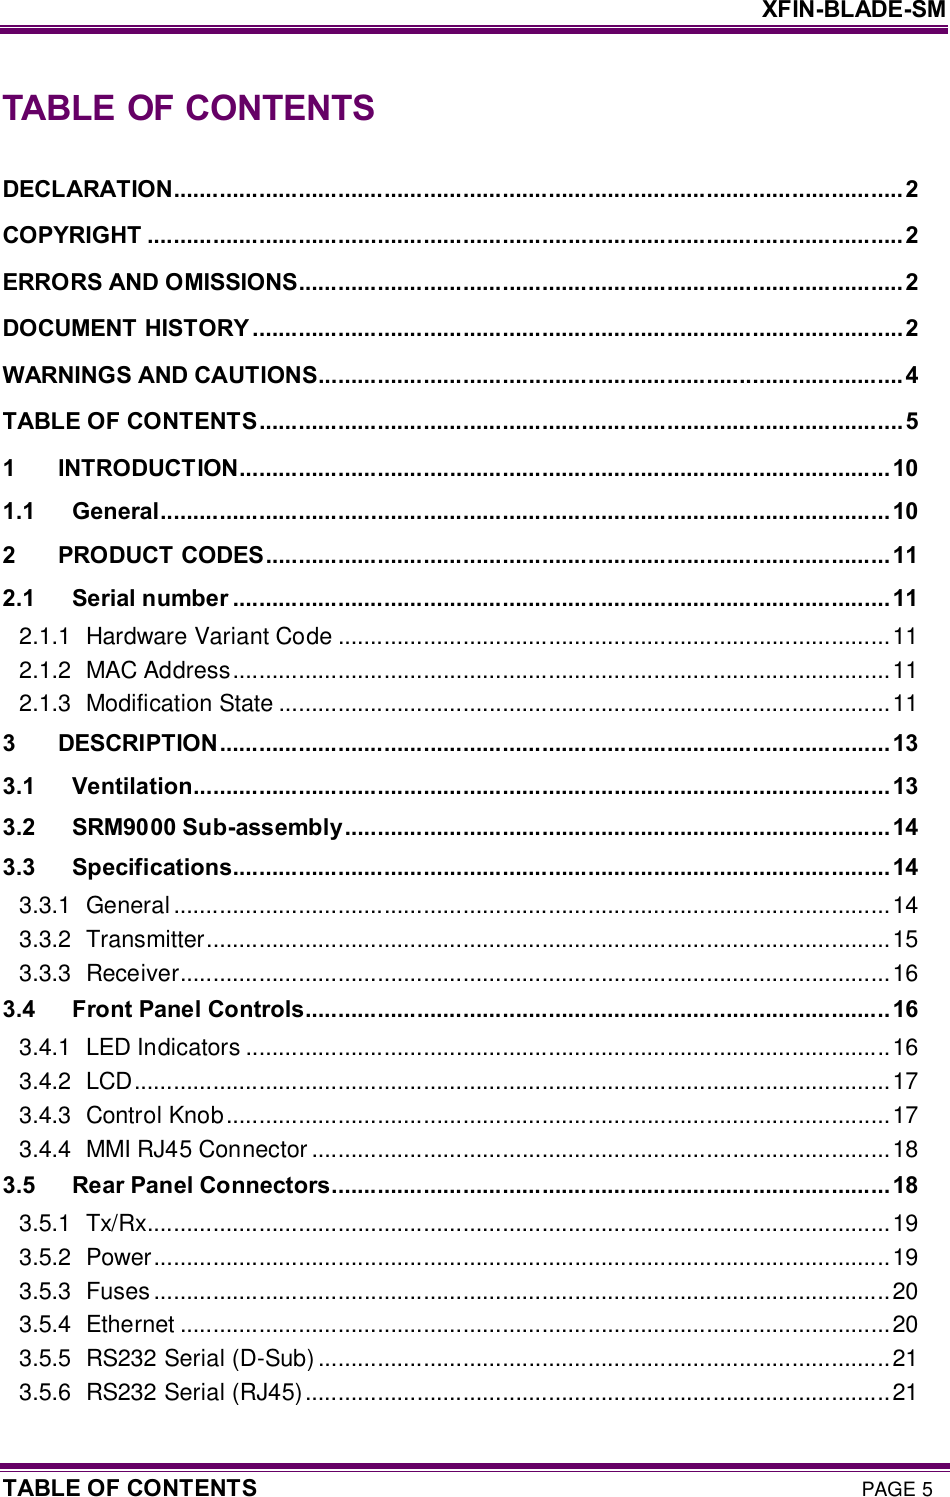     XFIN-BLADE-SM TABLE OF CONTENTS PAGE 5 TABLE OF CONTENTS  DECLARATION............................................................................................................... 2 COPYRIGHT ................................................................................................................... 2 ERRORS AND OMISSIONS............................................................................................2 DOCUMENT HISTORY ...................................................................................................2 WARNINGS AND CAUTIONS......................................................................................... 4 TABLE OF CONTENTS..................................................................................................5 1 INTRODUCTION...................................................................................................10 1.1 General...............................................................................................................10 2 PRODUCT CODES...............................................................................................11 2.1 Serial number ....................................................................................................11 2.1.1 Hardware Variant Code ....................................................................................11 2.1.2 MAC Address....................................................................................................11 2.1.3 Modification State .............................................................................................11 3 DESCRIPTION......................................................................................................13 3.1 Ventilation..........................................................................................................13 3.2 SRM9000 Sub-assembly...................................................................................14 3.3 Specifications....................................................................................................14 3.3.1 General.............................................................................................................14 3.3.2 Transmitter........................................................................................................15 3.3.3 Receiver............................................................................................................16 3.4 Front Panel Controls.........................................................................................16 3.4.1 LED Indicators ..................................................................................................16 3.4.2 LCD...................................................................................................................17 3.4.3 Control Knob.....................................................................................................17 3.4.4 MMI RJ45 Connector ........................................................................................18 3.5 Rear Panel Connectors.....................................................................................18 3.5.1 Tx/Rx.................................................................................................................19 3.5.2 Power................................................................................................................19 3.5.3 Fuses ................................................................................................................20 3.5.4 Ethernet ............................................................................................................20 3.5.5 RS232 Serial (D-Sub) .......................................................................................21 3.5.6 RS232 Serial (RJ45).........................................................................................21 